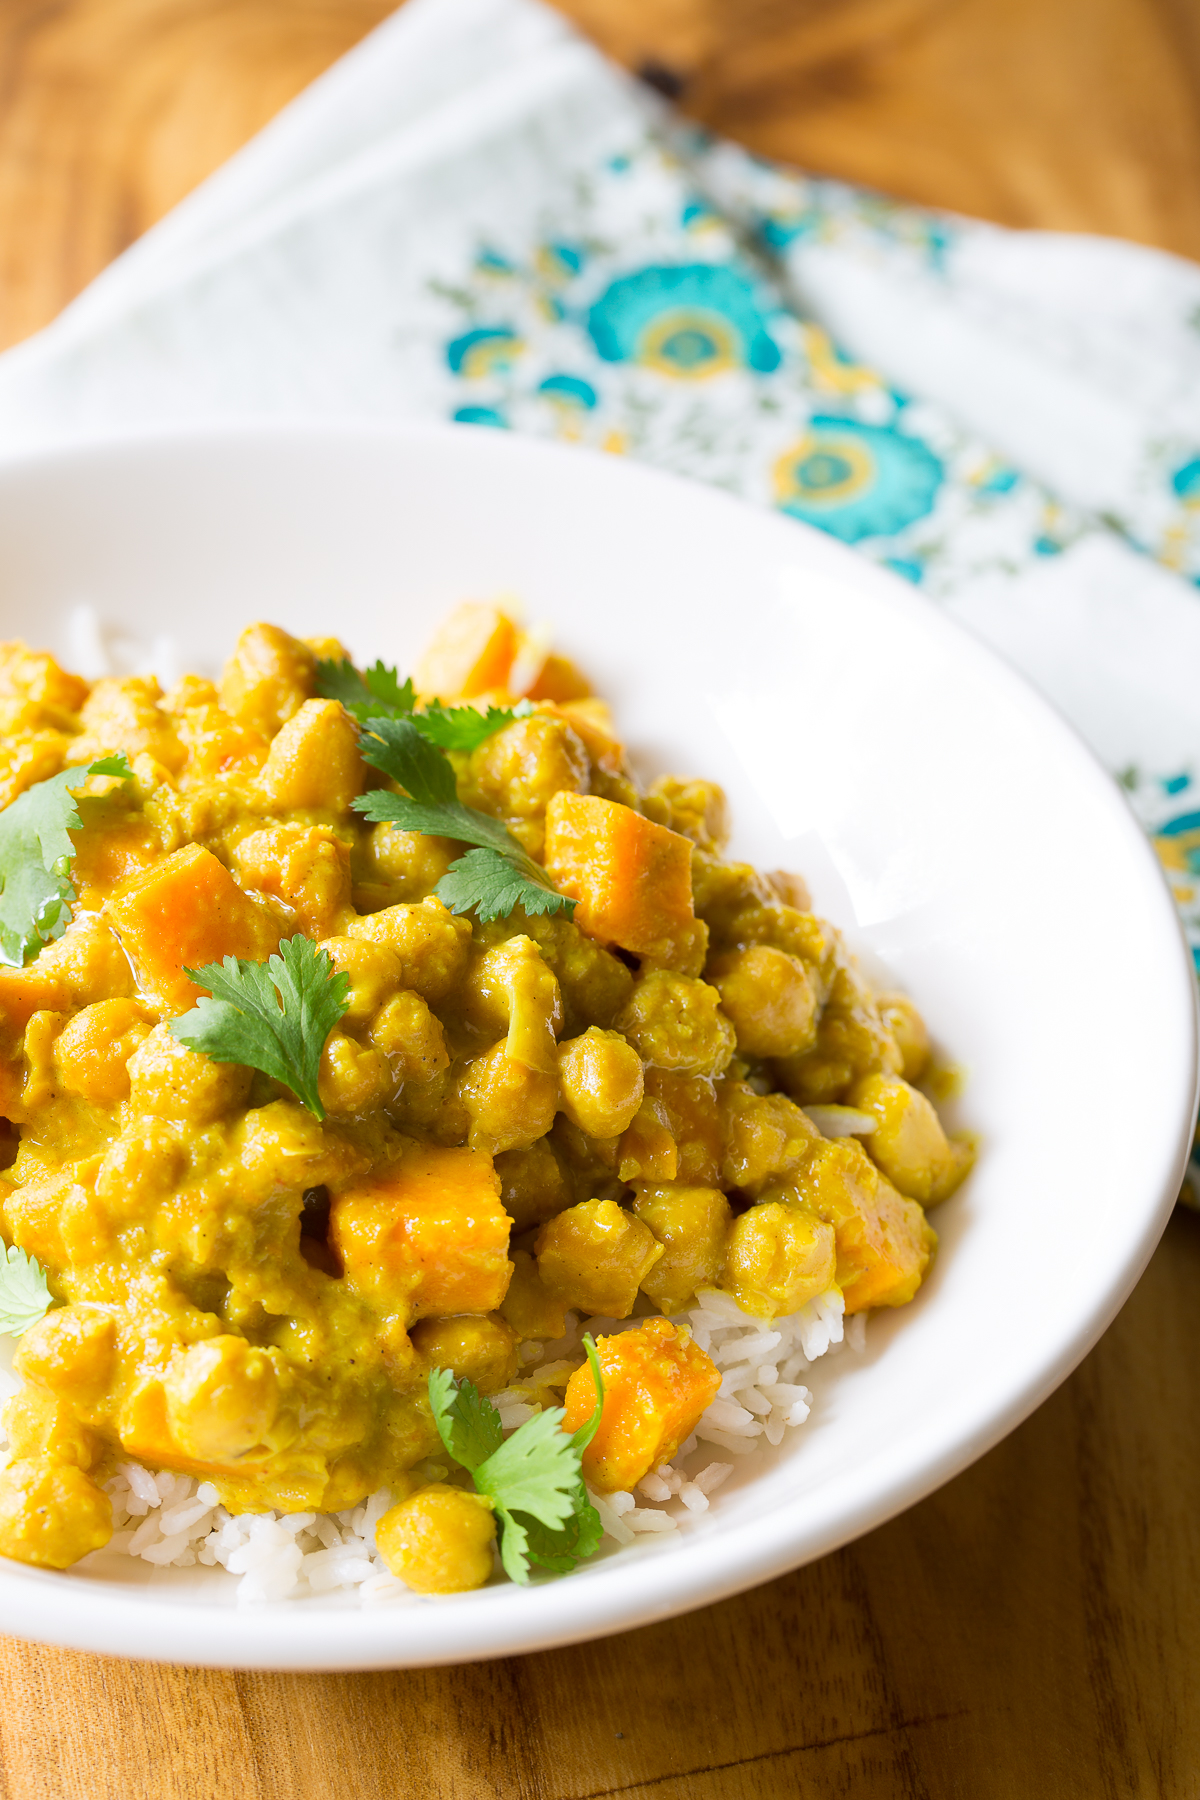 Slow Cooker Chickpea Curry Recipe #ASpicyPerspective #SlowCooker #Crockpot #Chickpea #Curry #ChickpeaCurry #ChickpeaCurryRecipe #CrockpotCurry #IndianCurry #Indian #GlutenFree